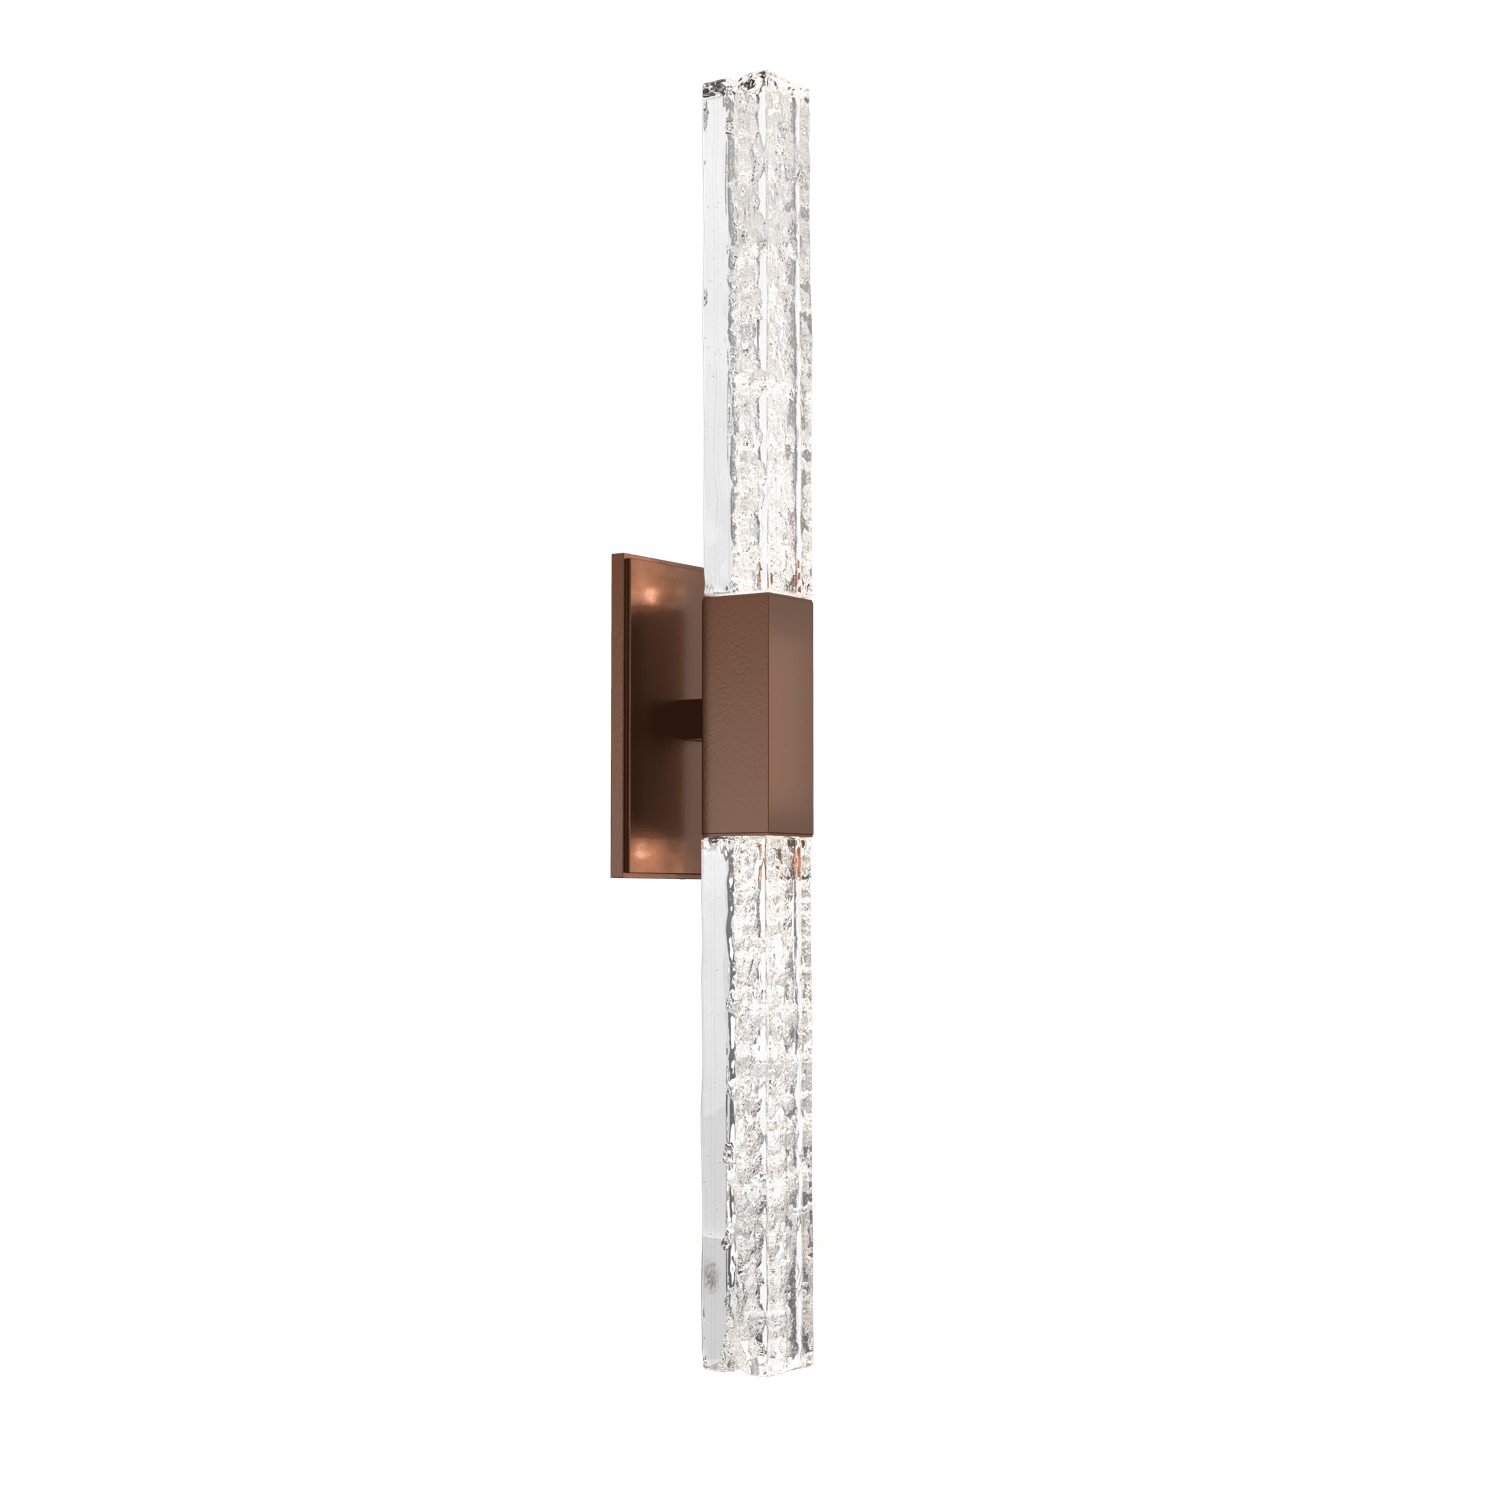 IDB0060-02-BB-GC-Hammerton-Studio-Axis-Double-Wall-Sconce-with-Burnished-Bronze-finish-and-clear-cast-glass-and-LED-lamping